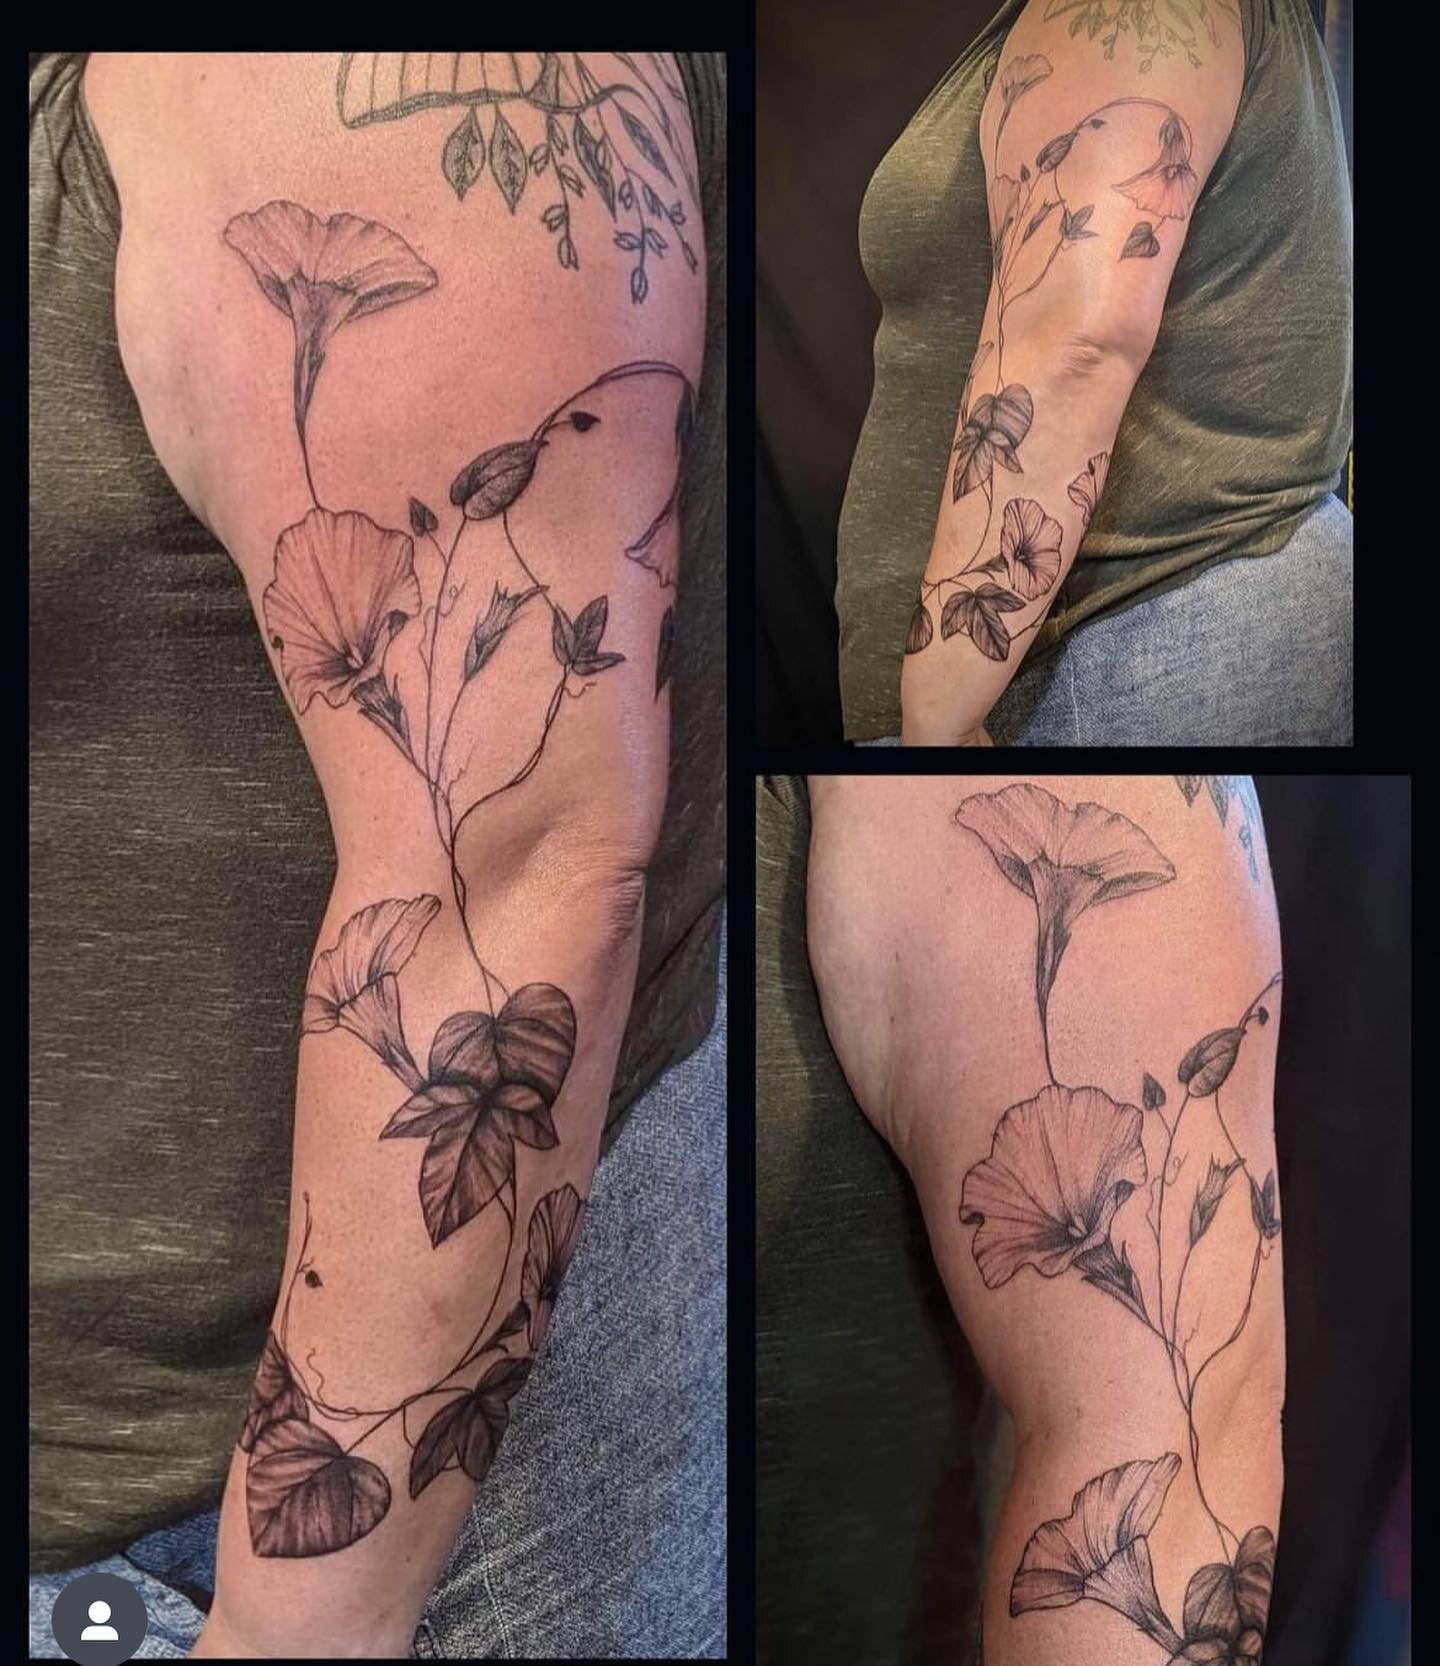 By Becca @becca.ink
&bull;
Elegant, quality, unique, one of a kind Floral&hellip;.healed beautifully&hellip;.
&bull;
Appointments available monthly!
&bull;
Call or email to book with Becca
&bull;
&bull;
&bull;
#worldfamousmonkeyhousecustoms #inked #t